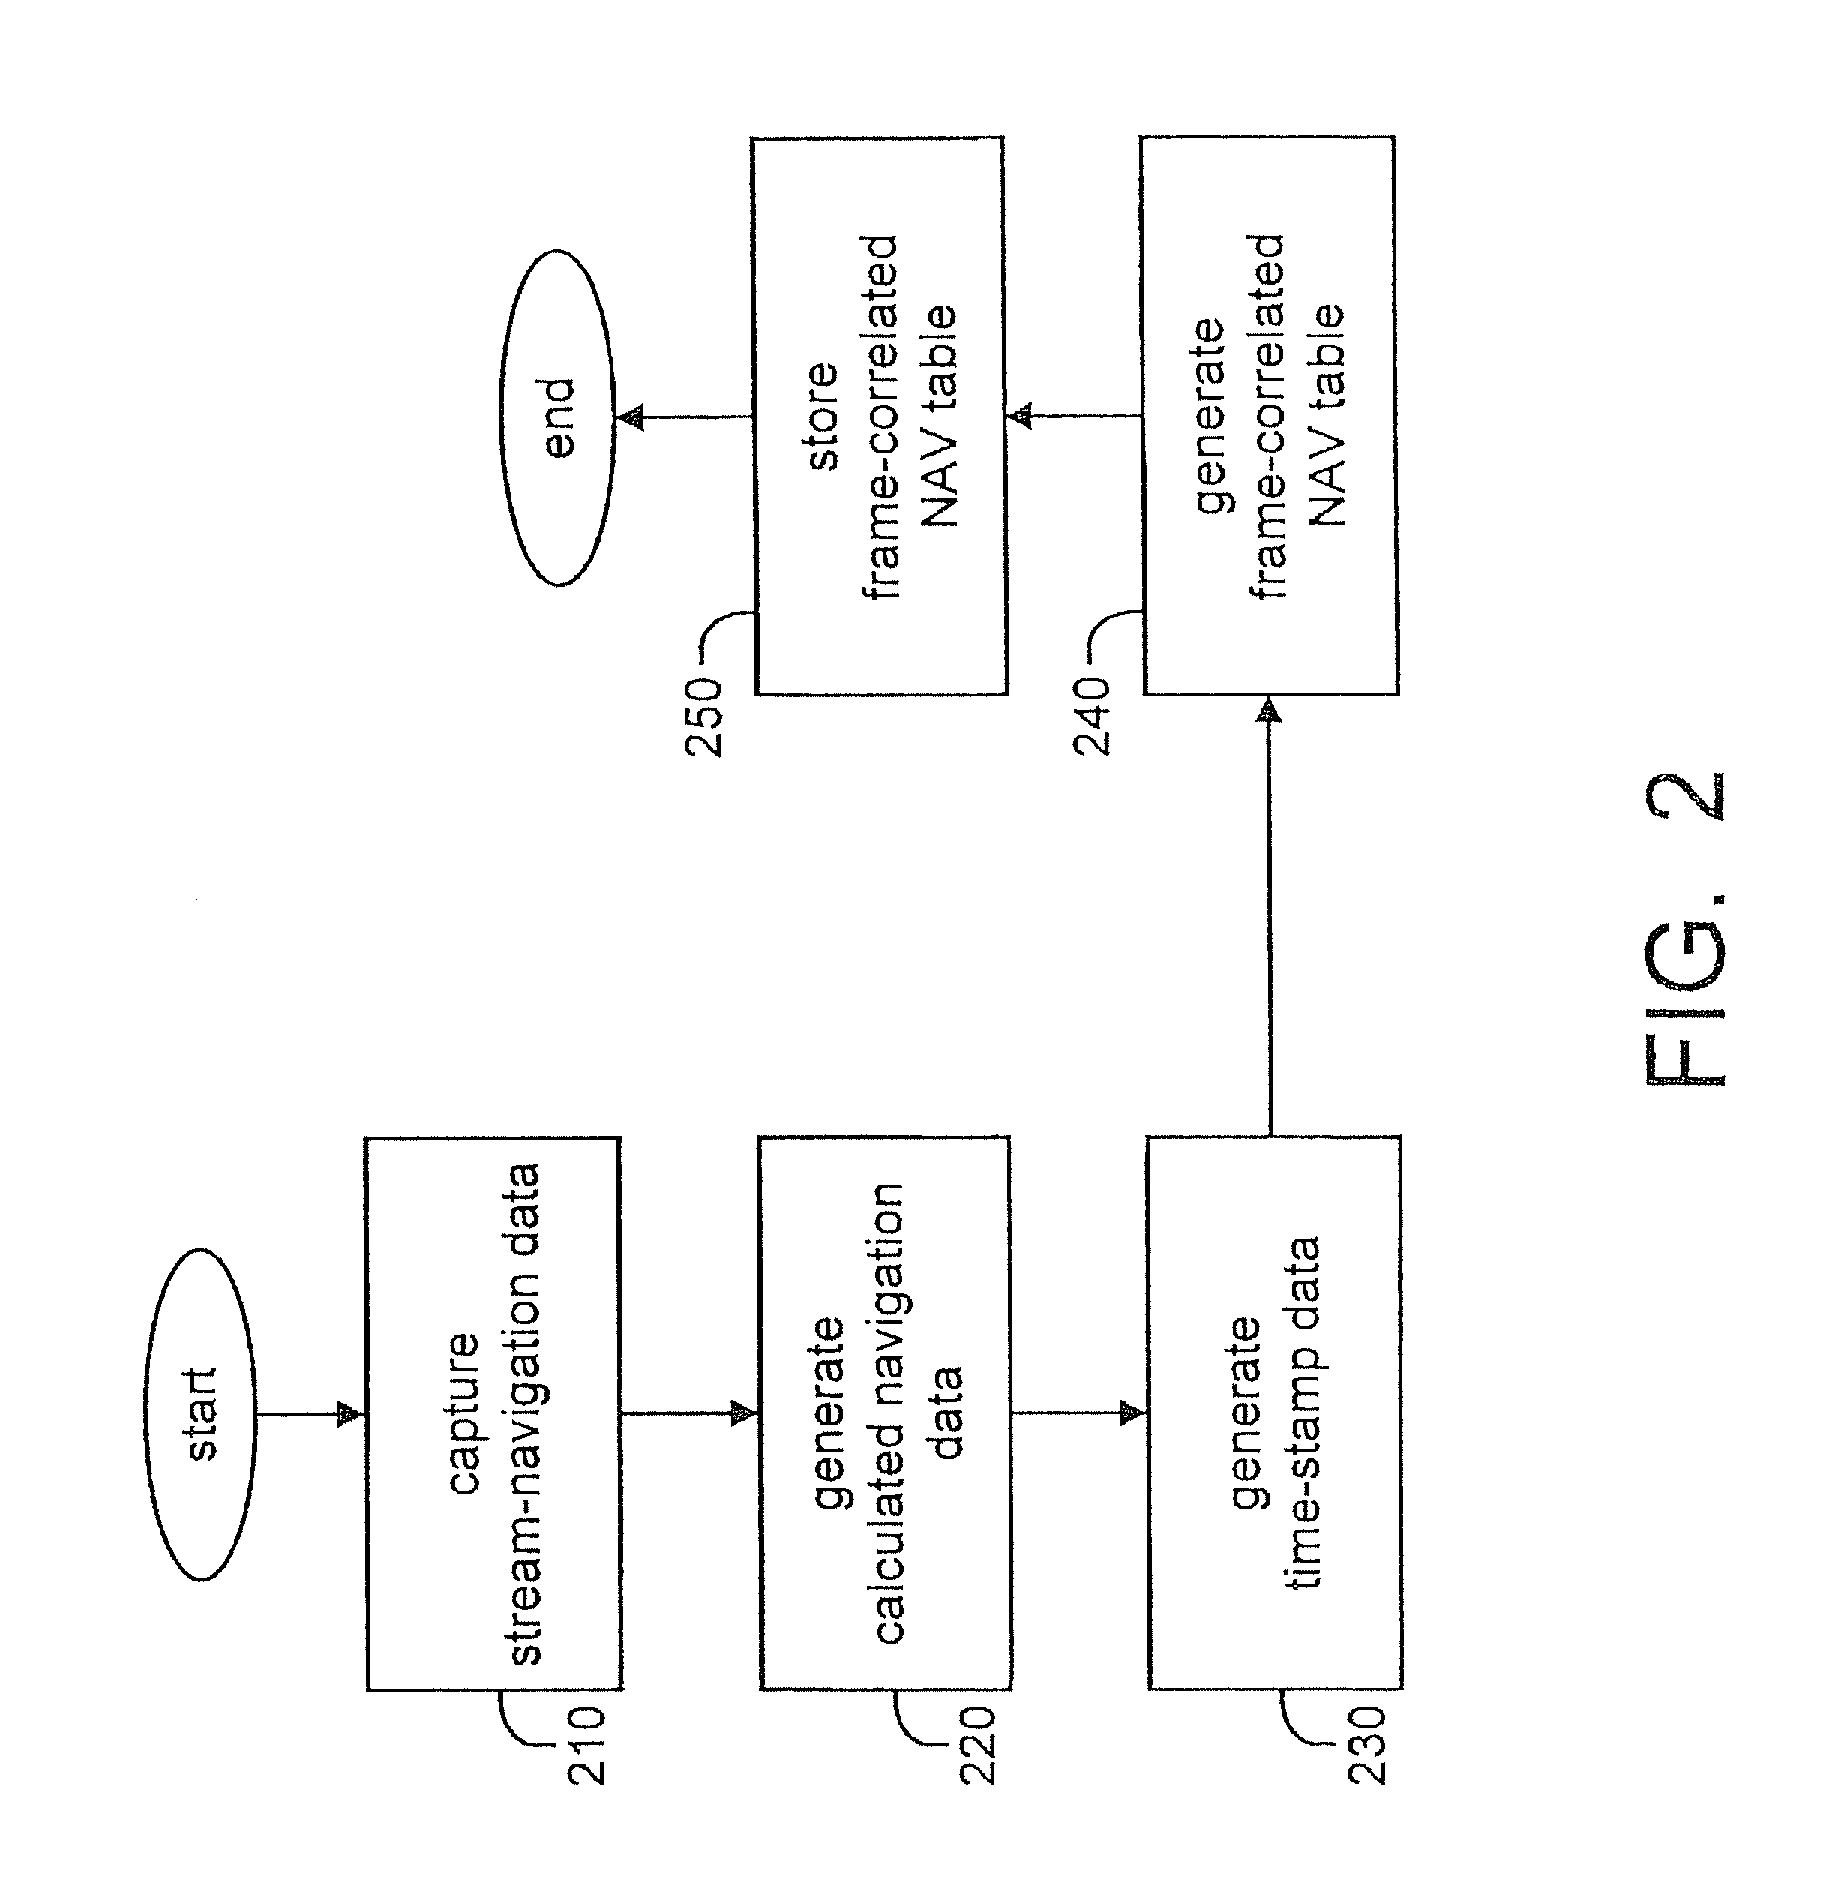 Method and apparatus to facilitate the efficient implementation of trick modes in a personal video recording system